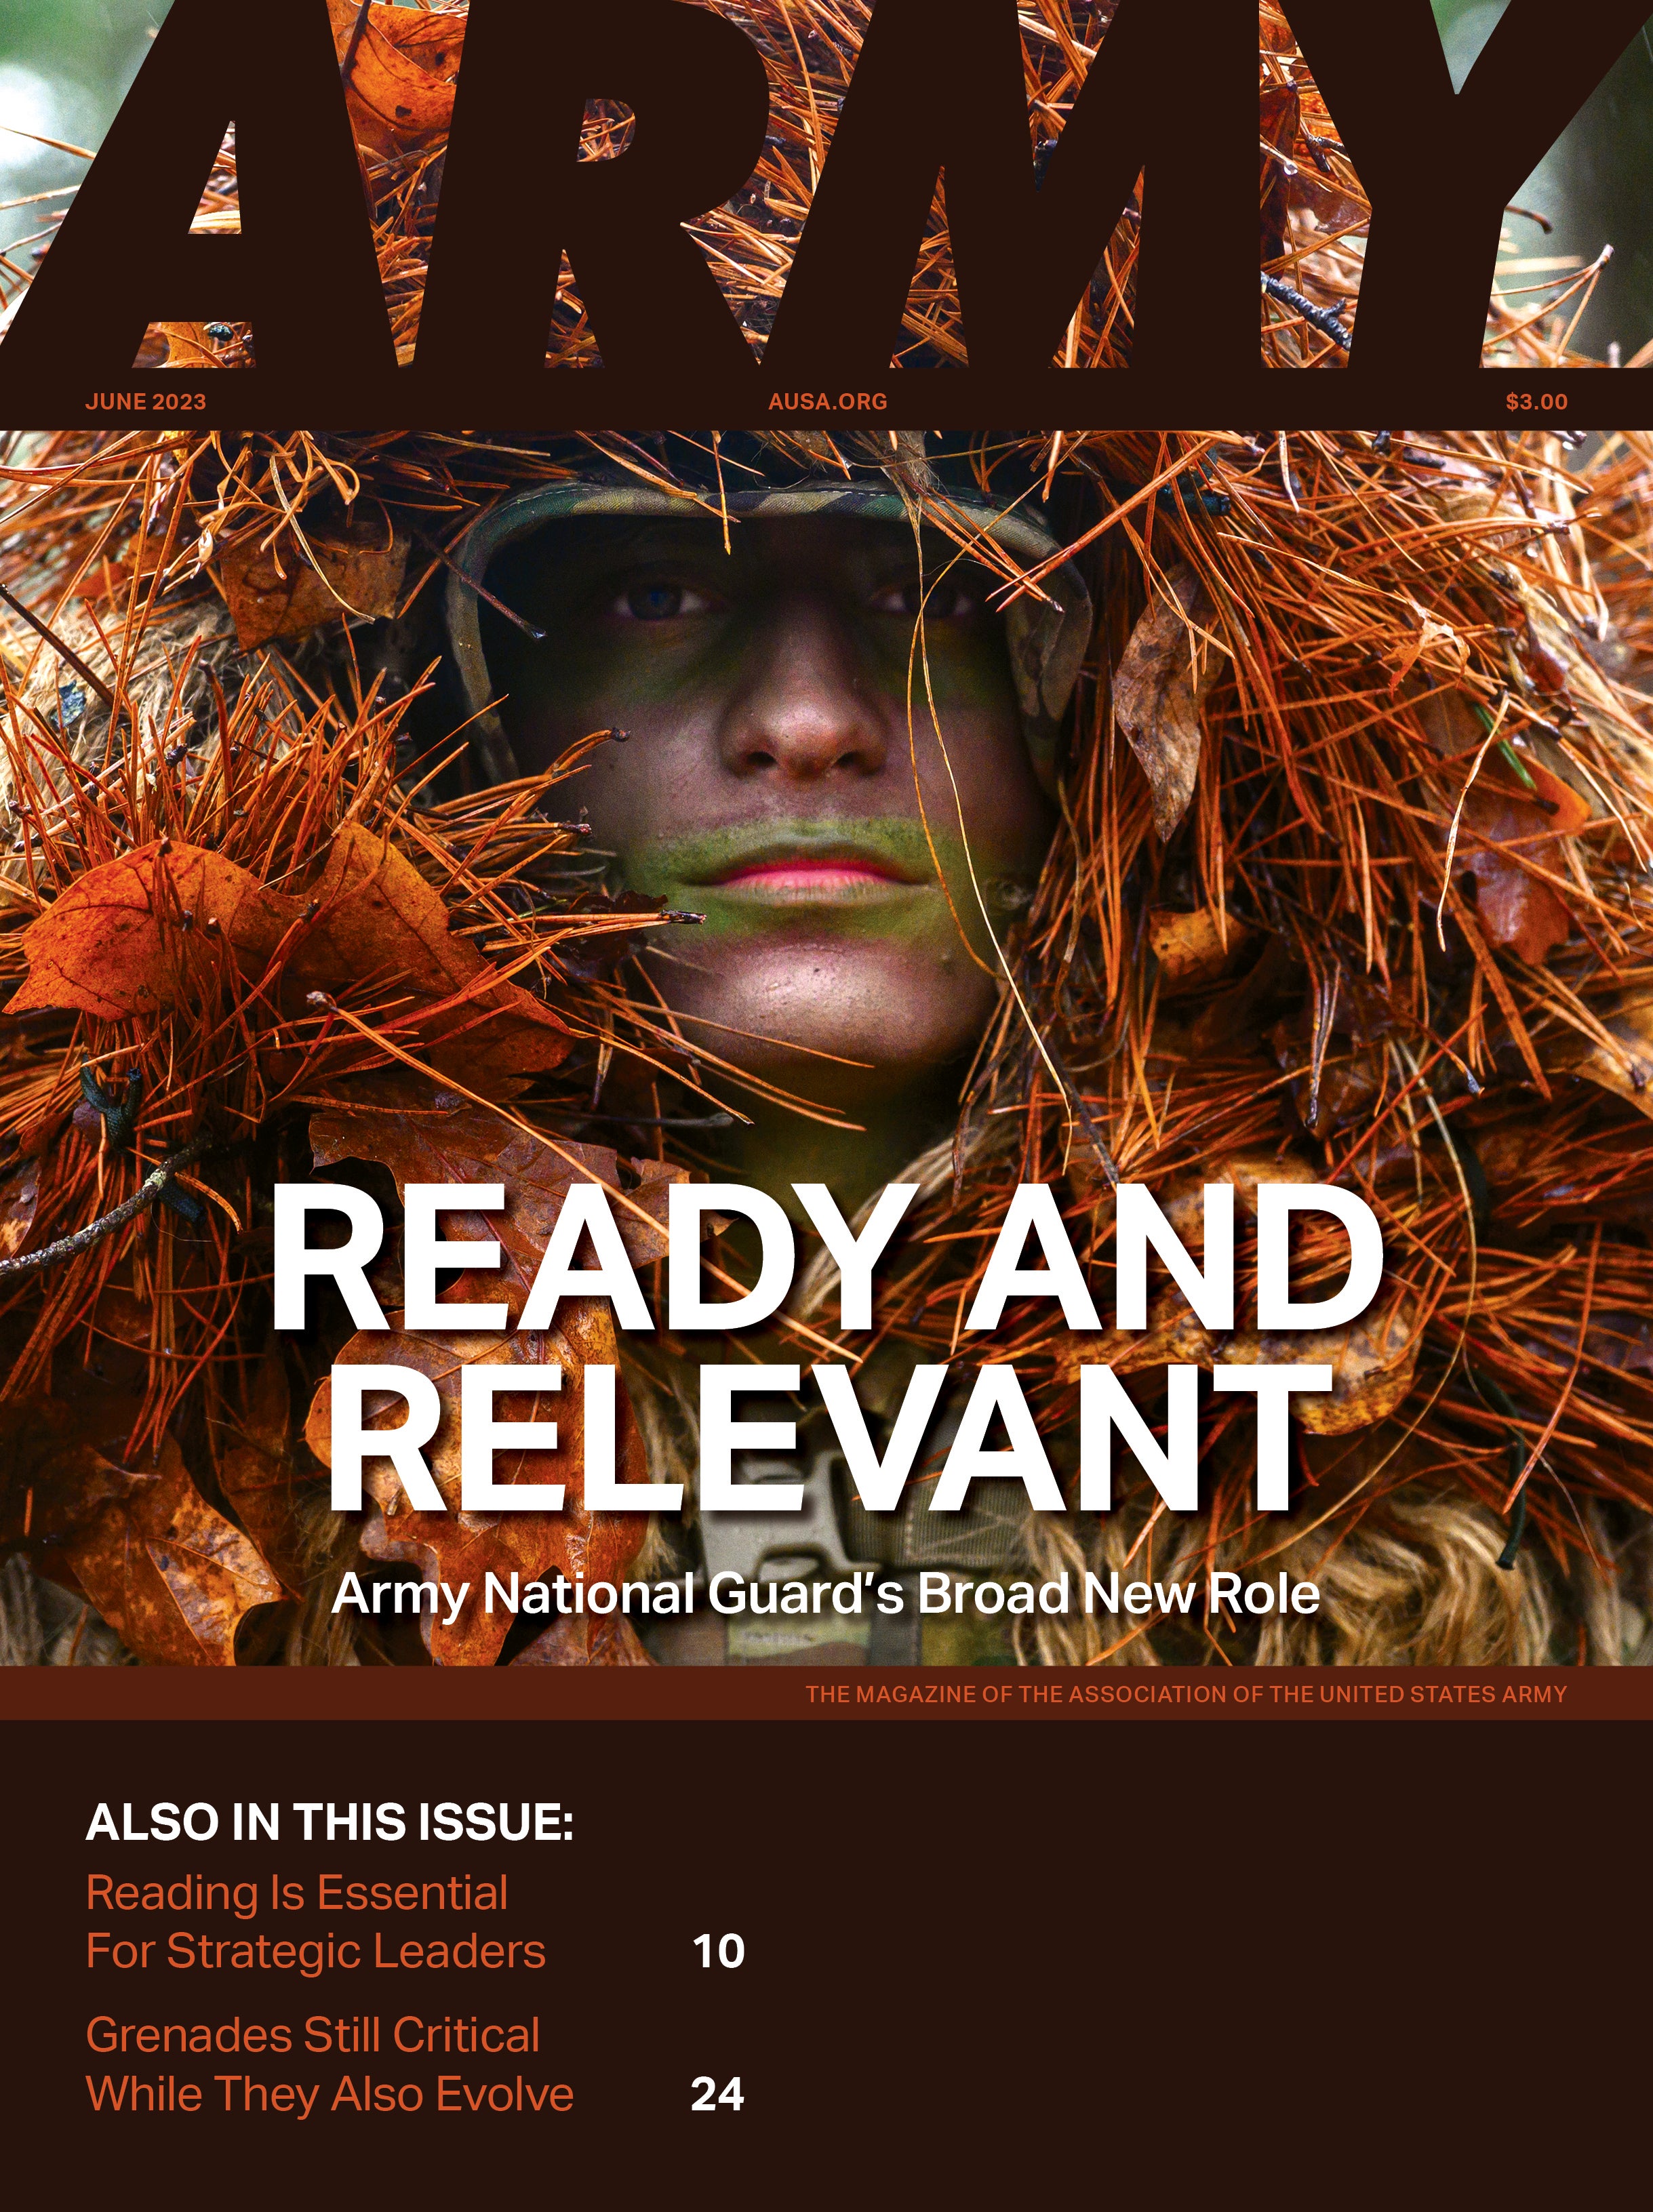 June 2023 ARMY magazine cover